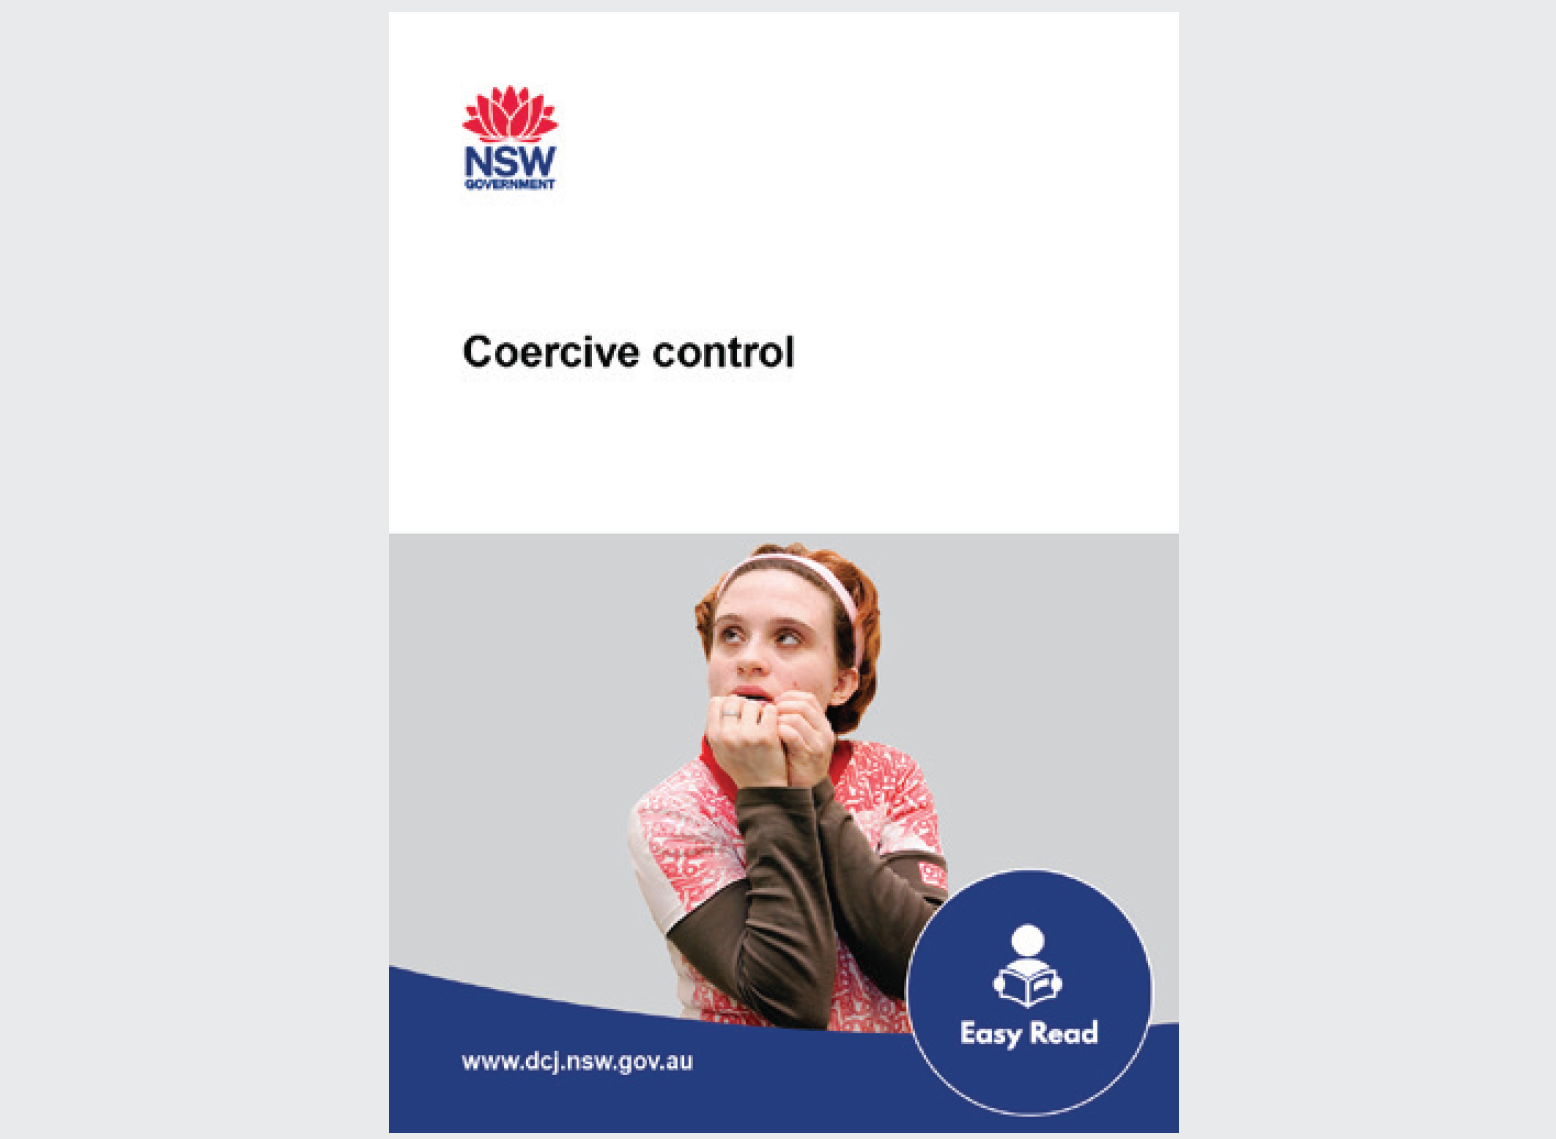 This information is about coercive control.